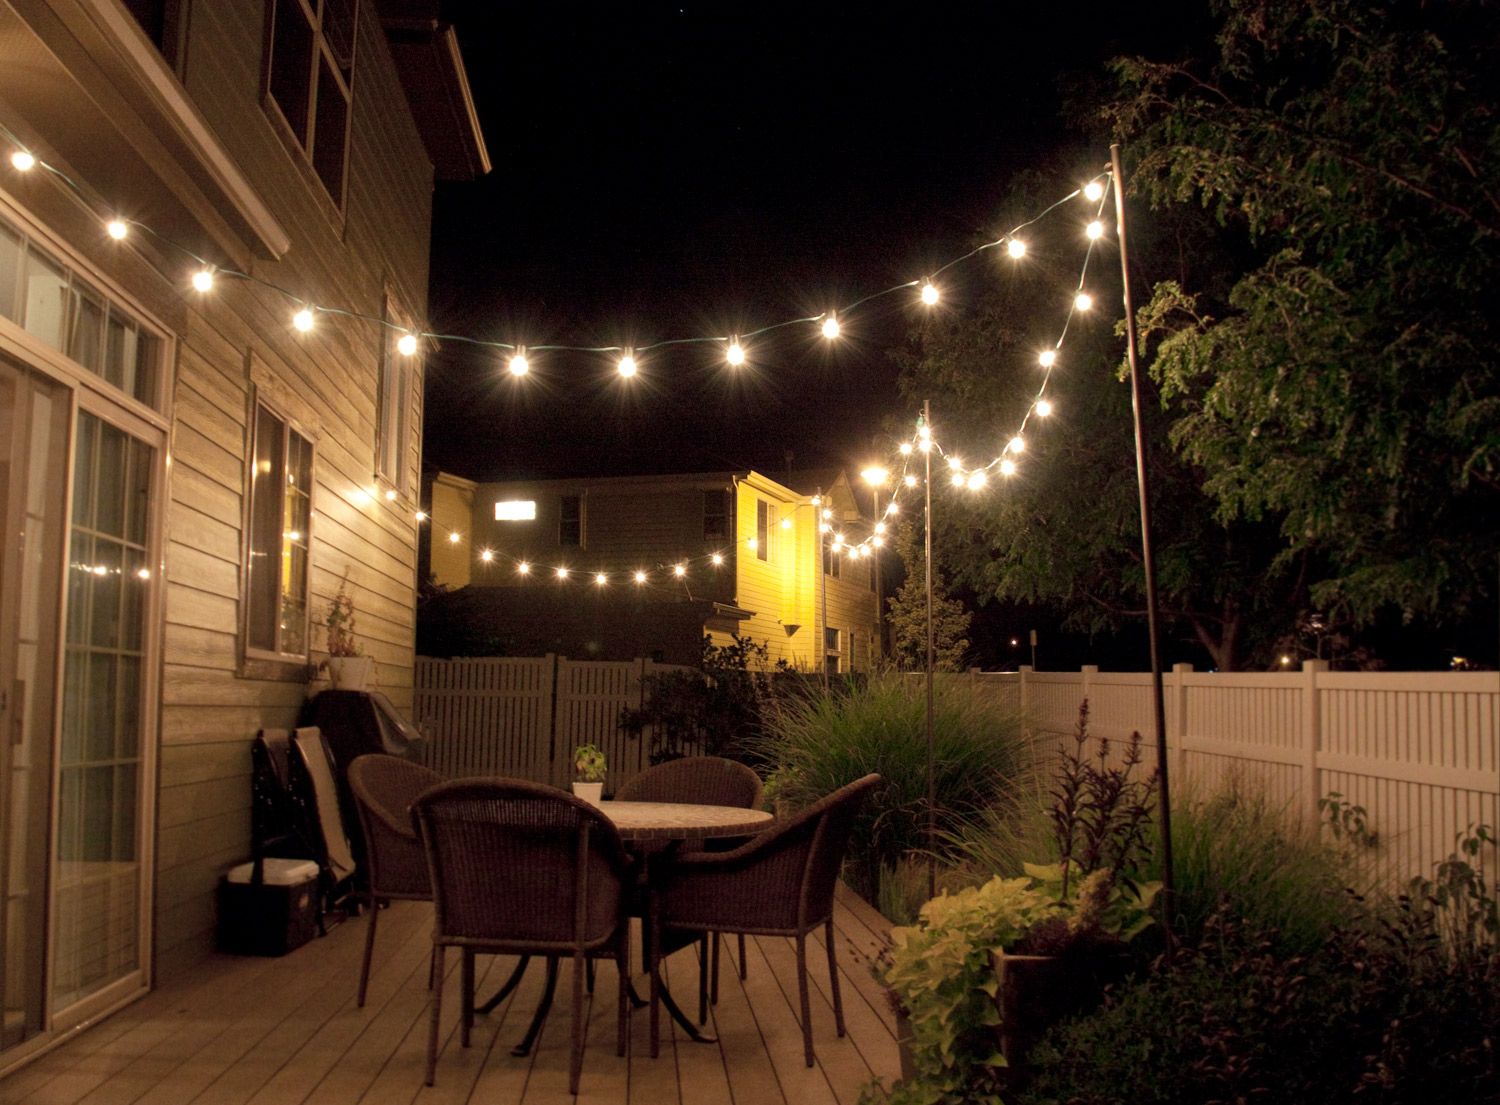 How to make inexpensive poles to hang string lights on - café style! Via  Bright July